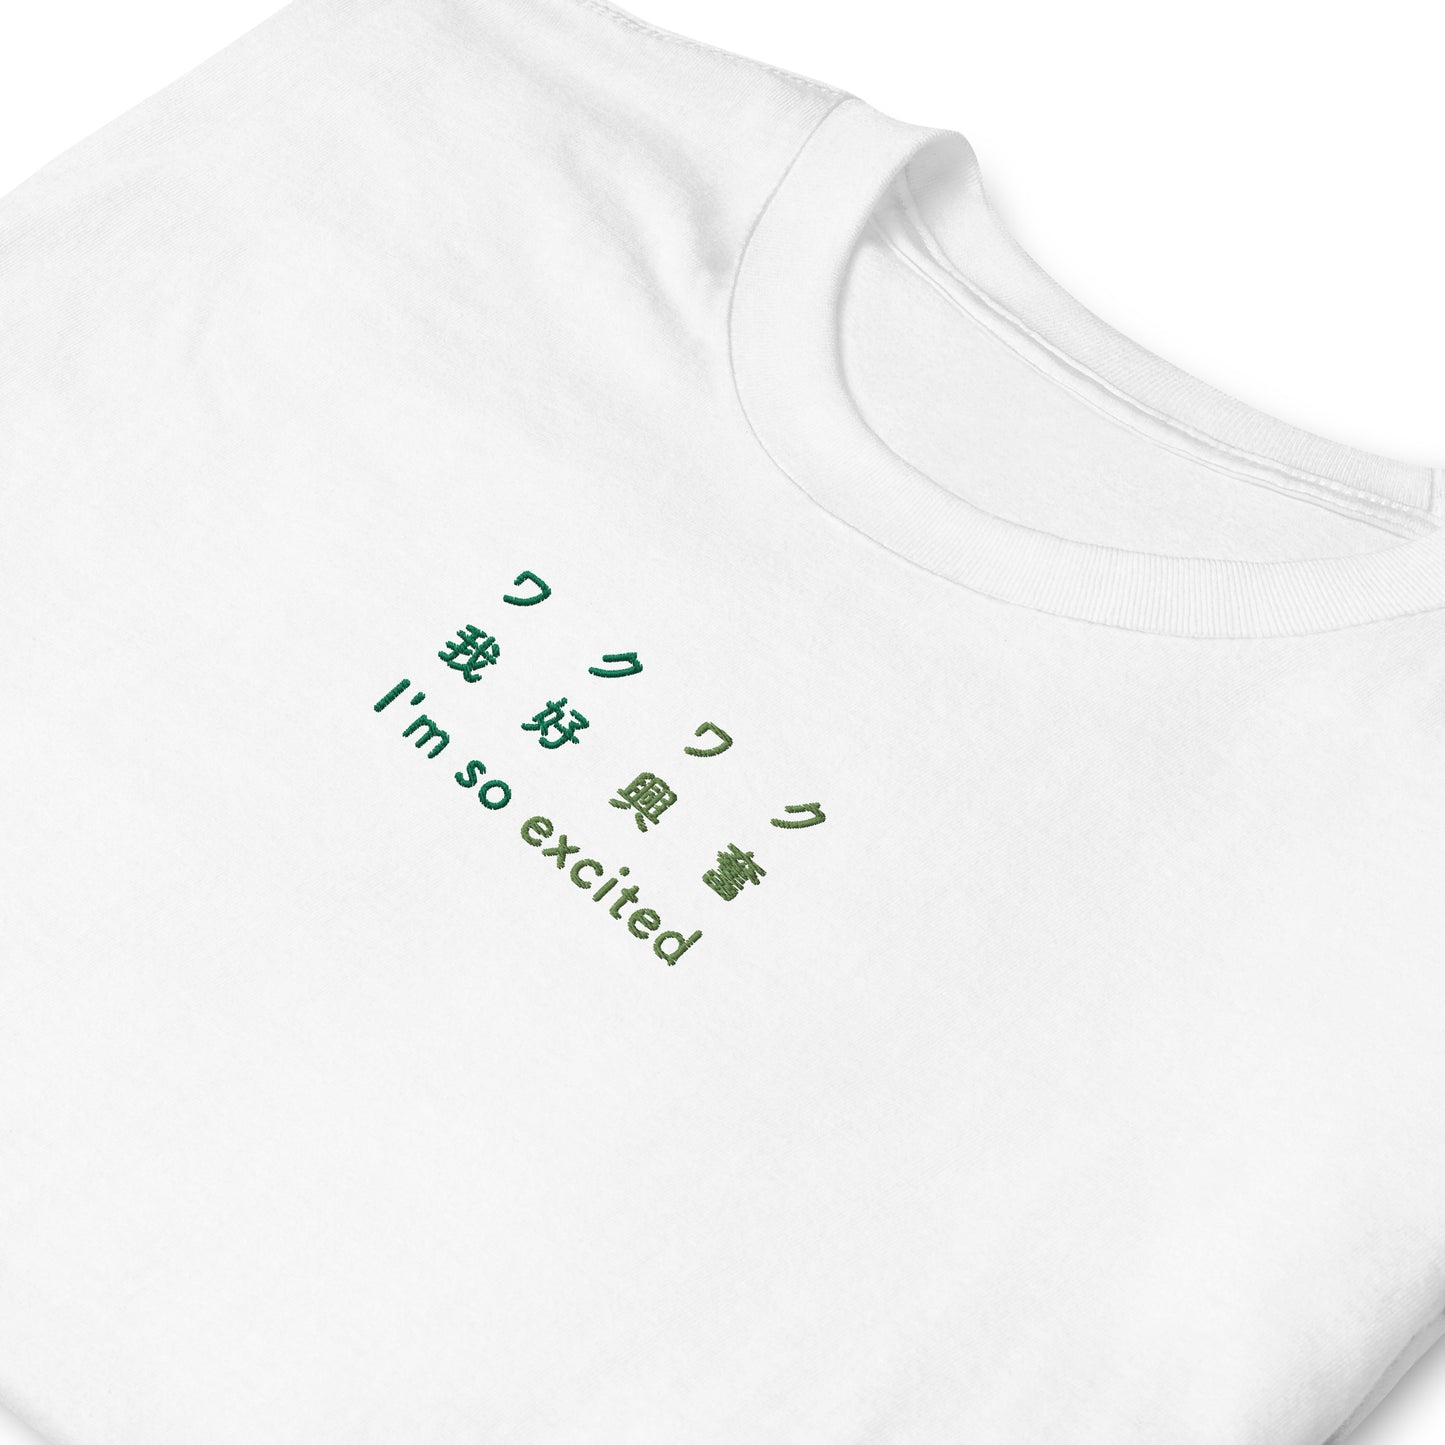 White High Quality Tee - Front Design with a Gradient Green Embroidery "I'm so excited" in Japanese,Chinese and English